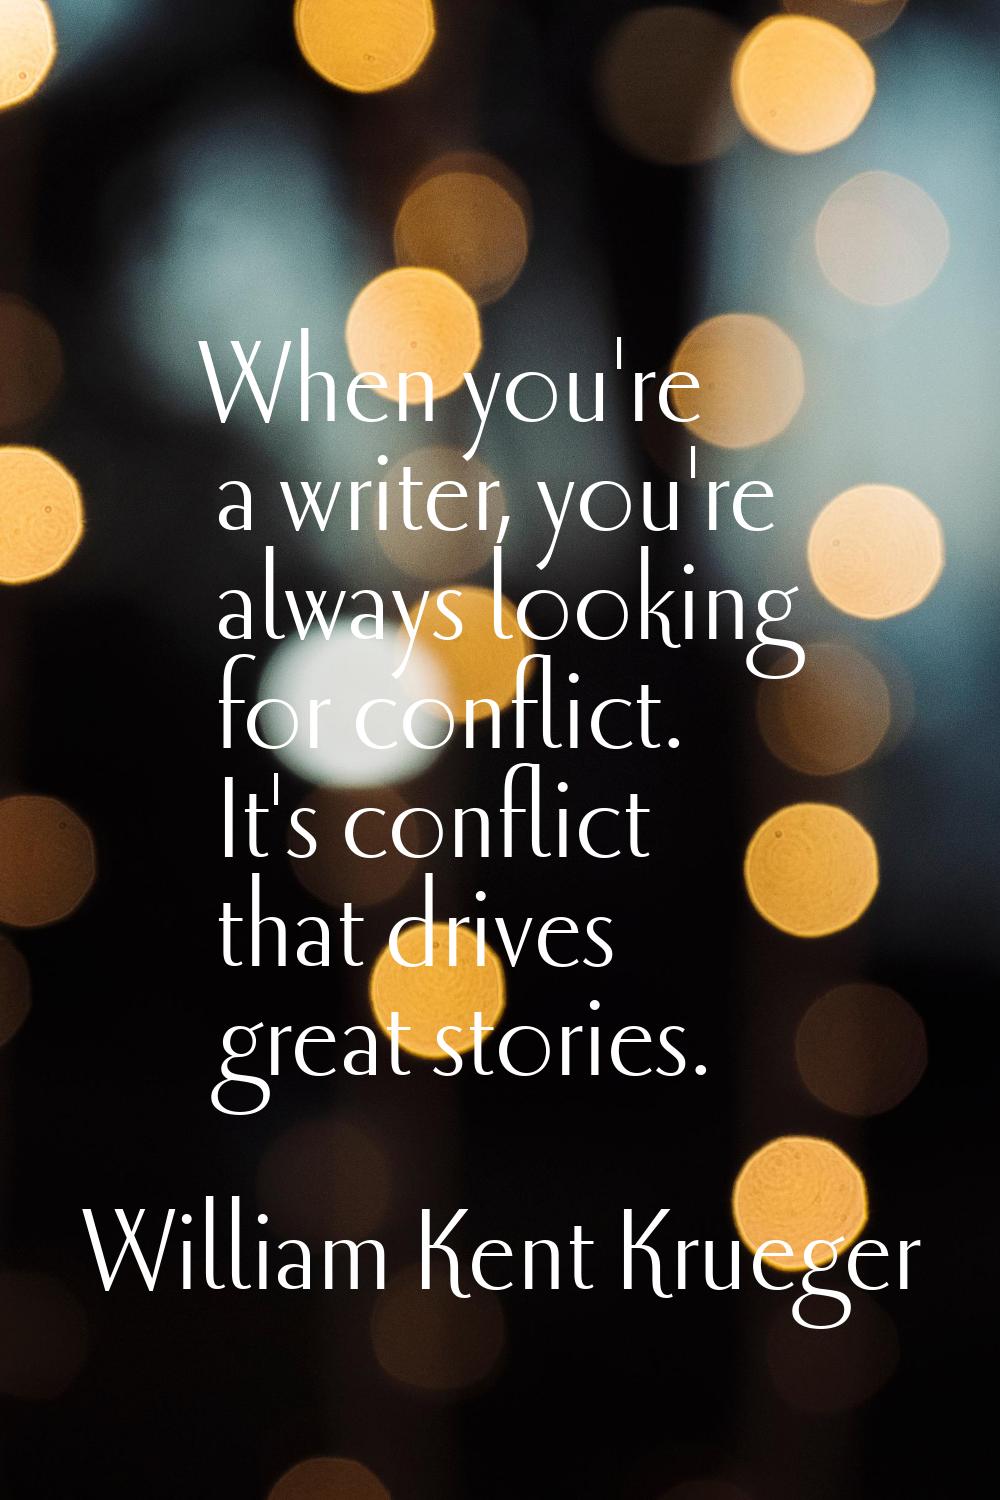 When you're a writer, you're always looking for conflict. It's conflict that drives great stories.